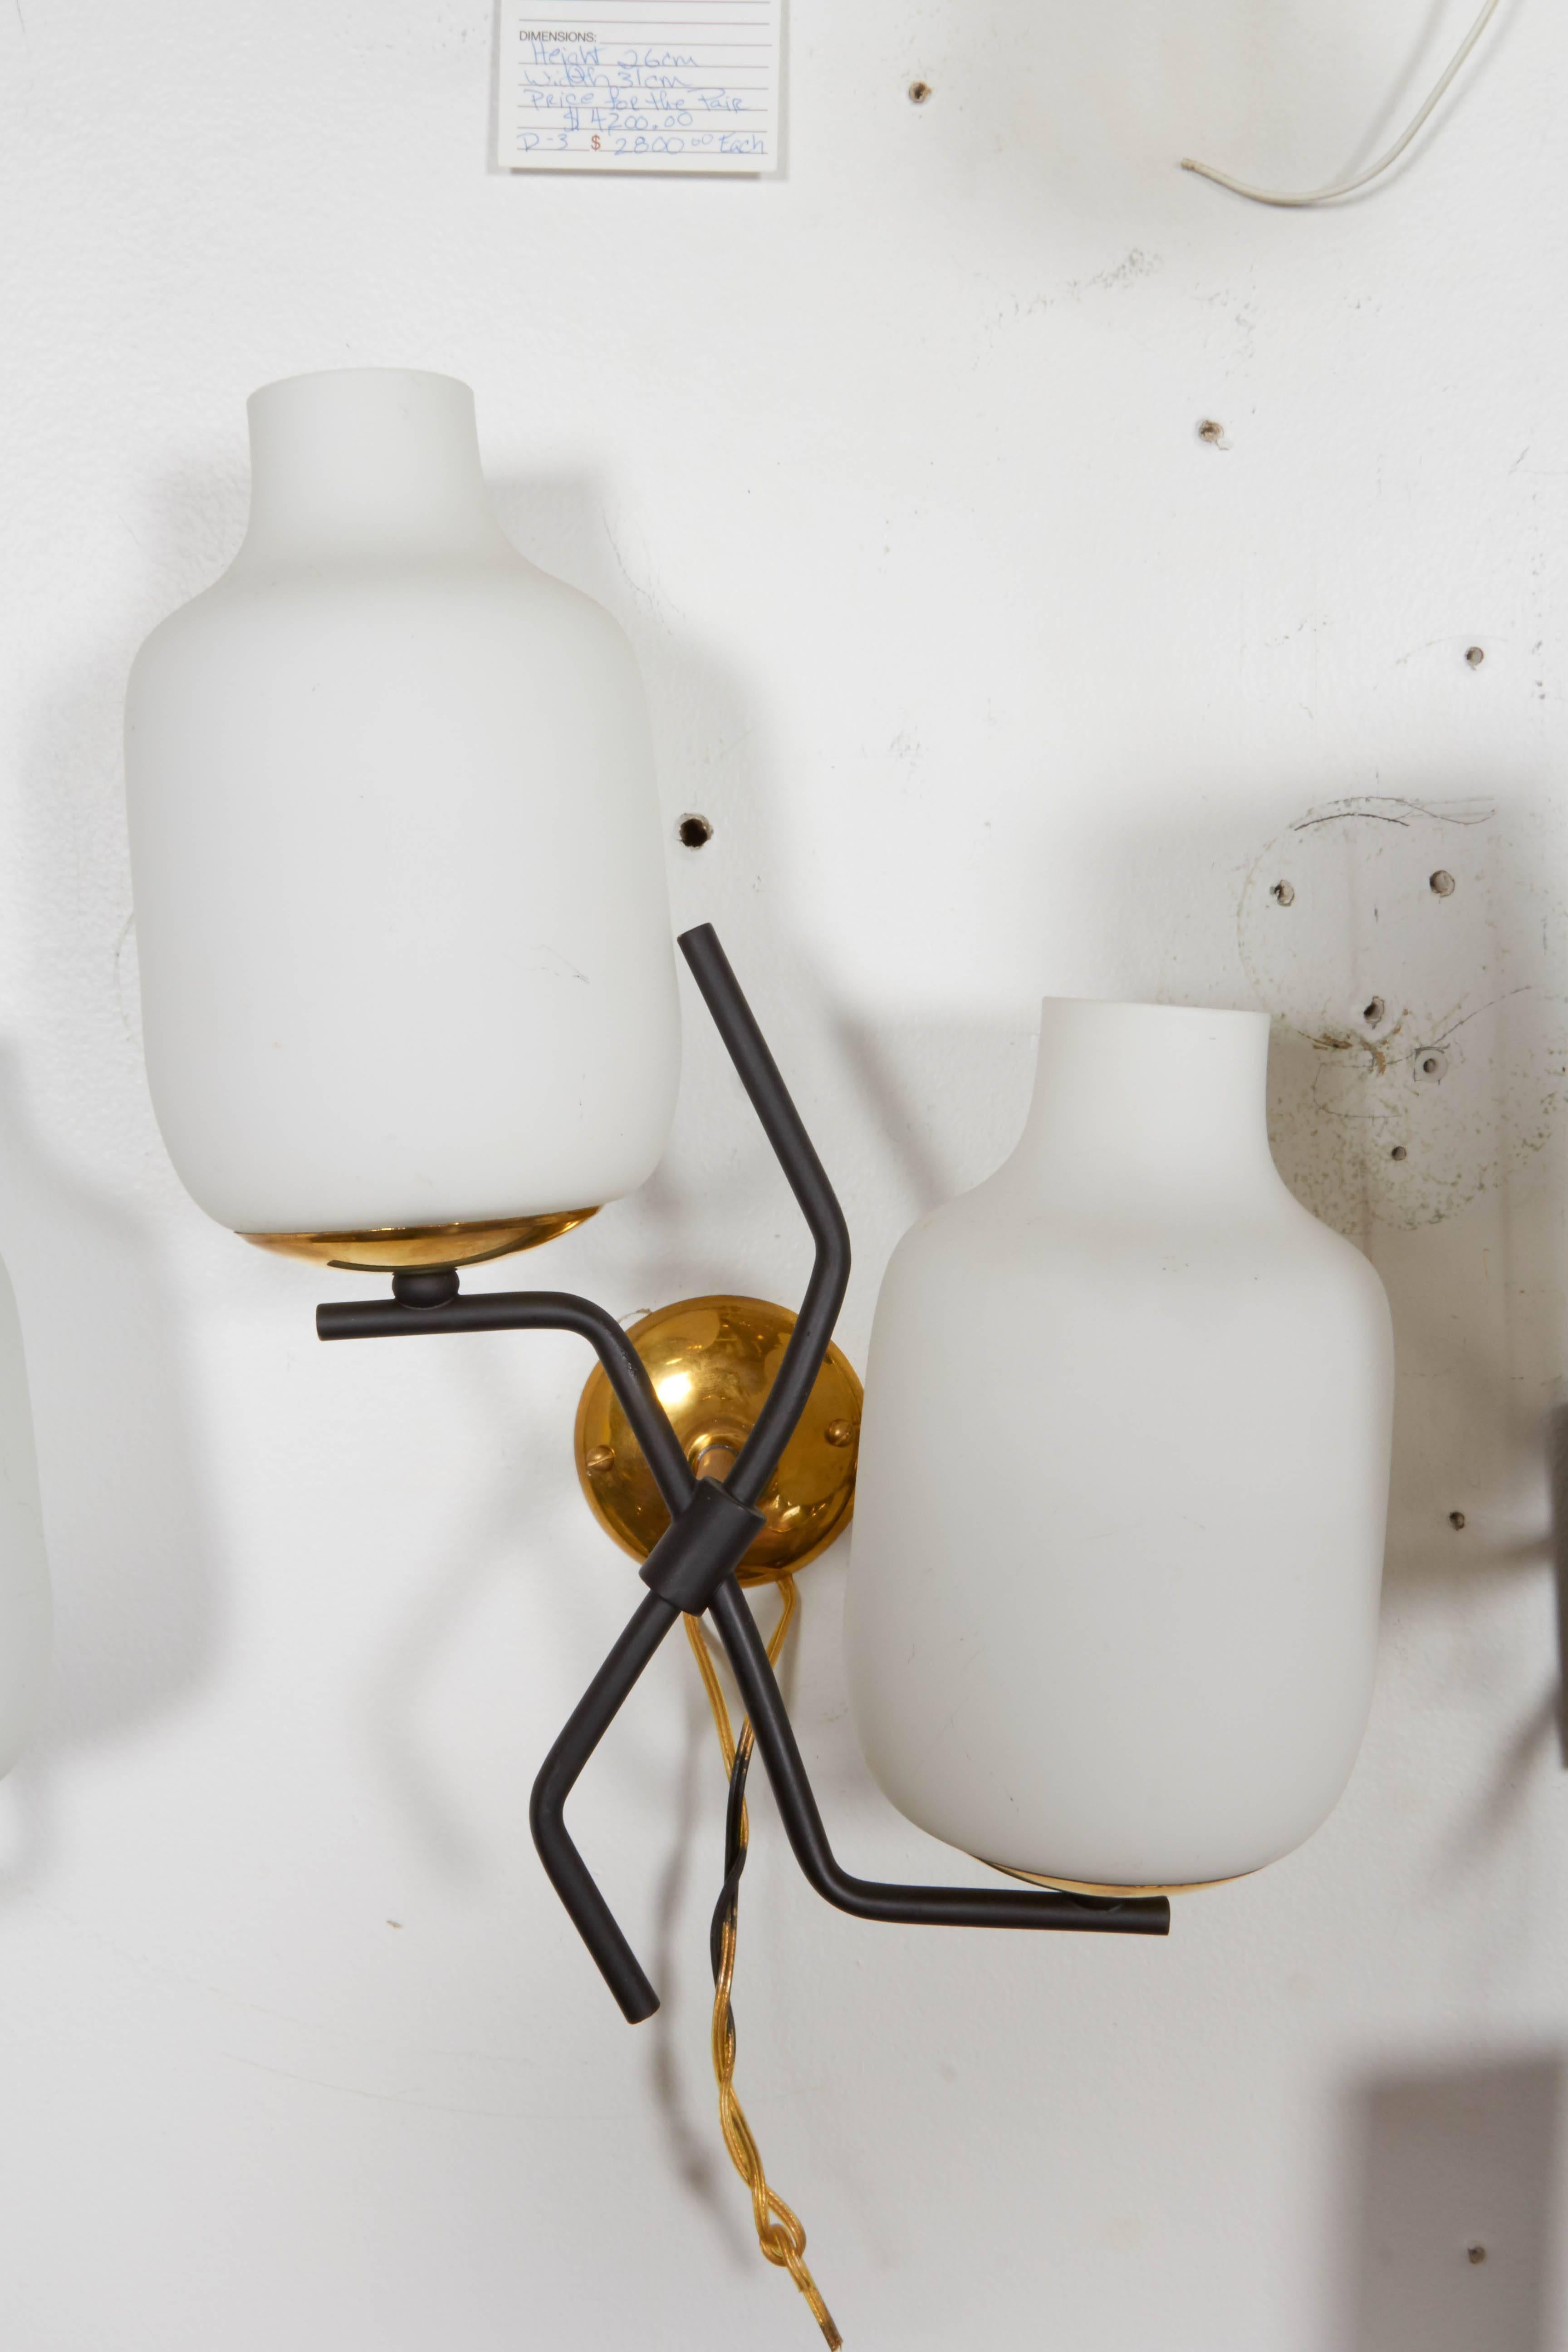 A pair of, circa 1950s Italian wall sconces by Stilnovo each with two milk glass shades, on contrasting black enamel stems, branched out at dissimilar lengths from brass mounts, creating a great sense of proportion. Wiring and sockets to US